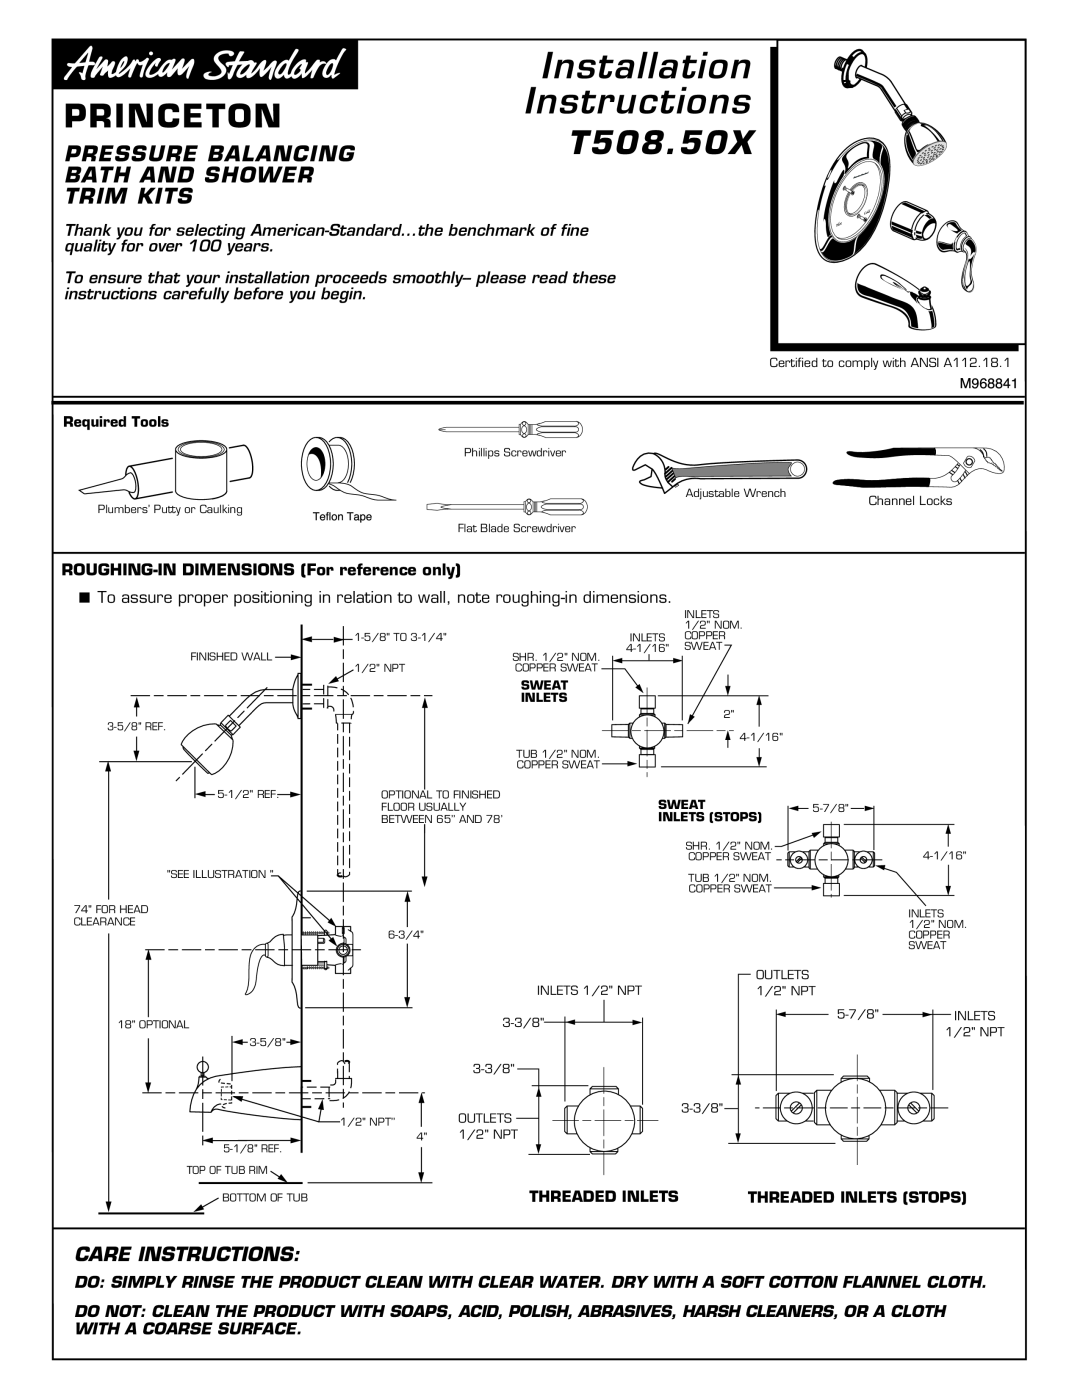 American Standard T508.50X installation instructions ROUGHING-IN DIMENSIONS For reference only, Installation, Instructions 